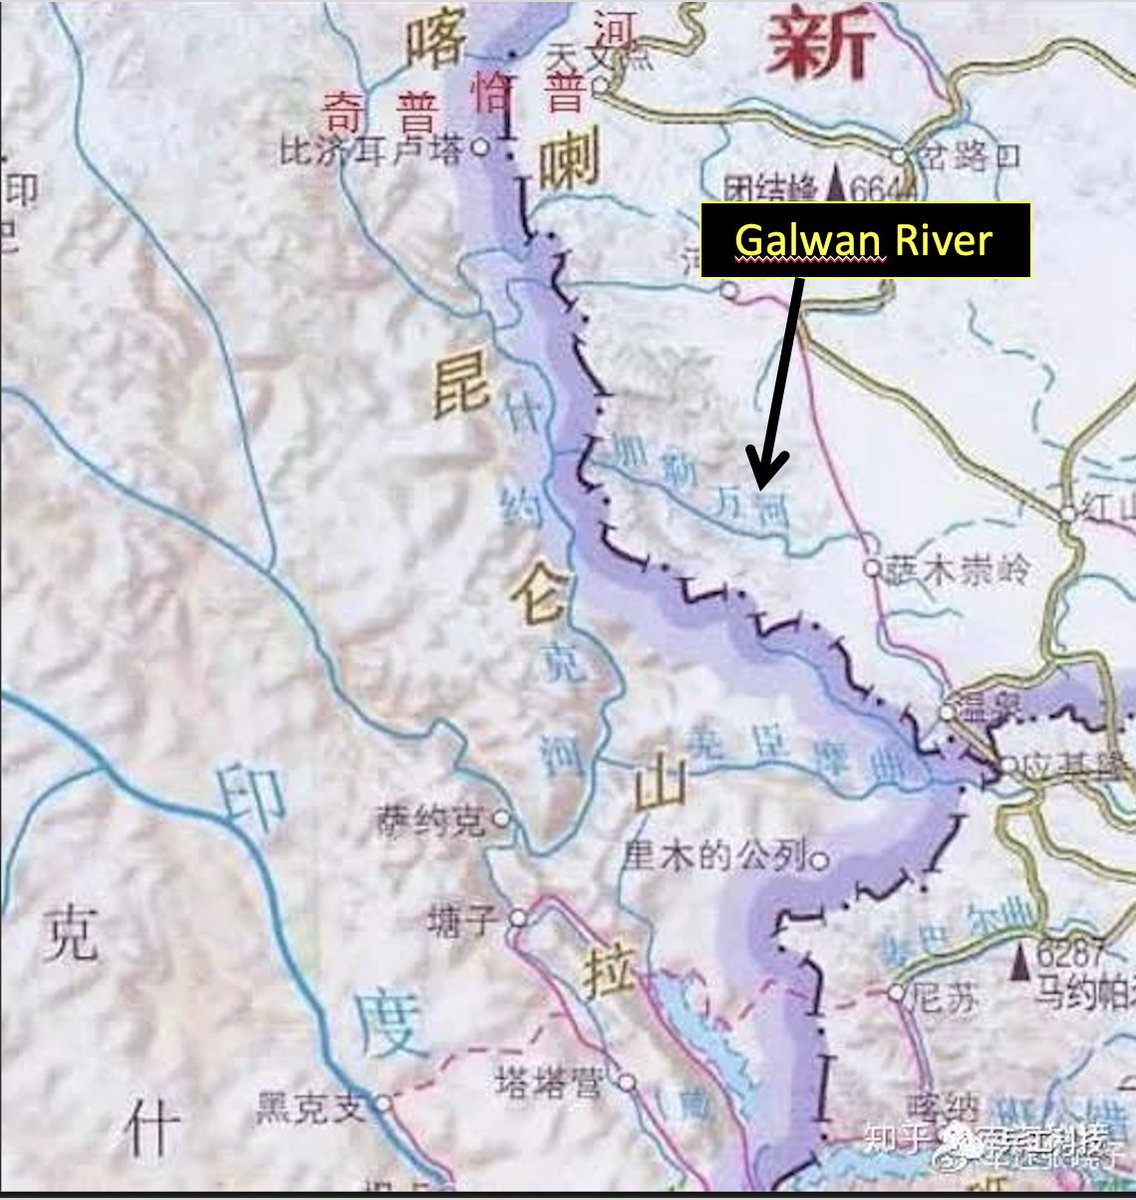 These maps show China claiming almost all of the Galwan Valley, ending where the Galwan begins to flow east to west, roughly where PP14 is located. Note: I do not know if these are official maps, but they are maps published in simplified Chinese and thus presumably in the PRC.